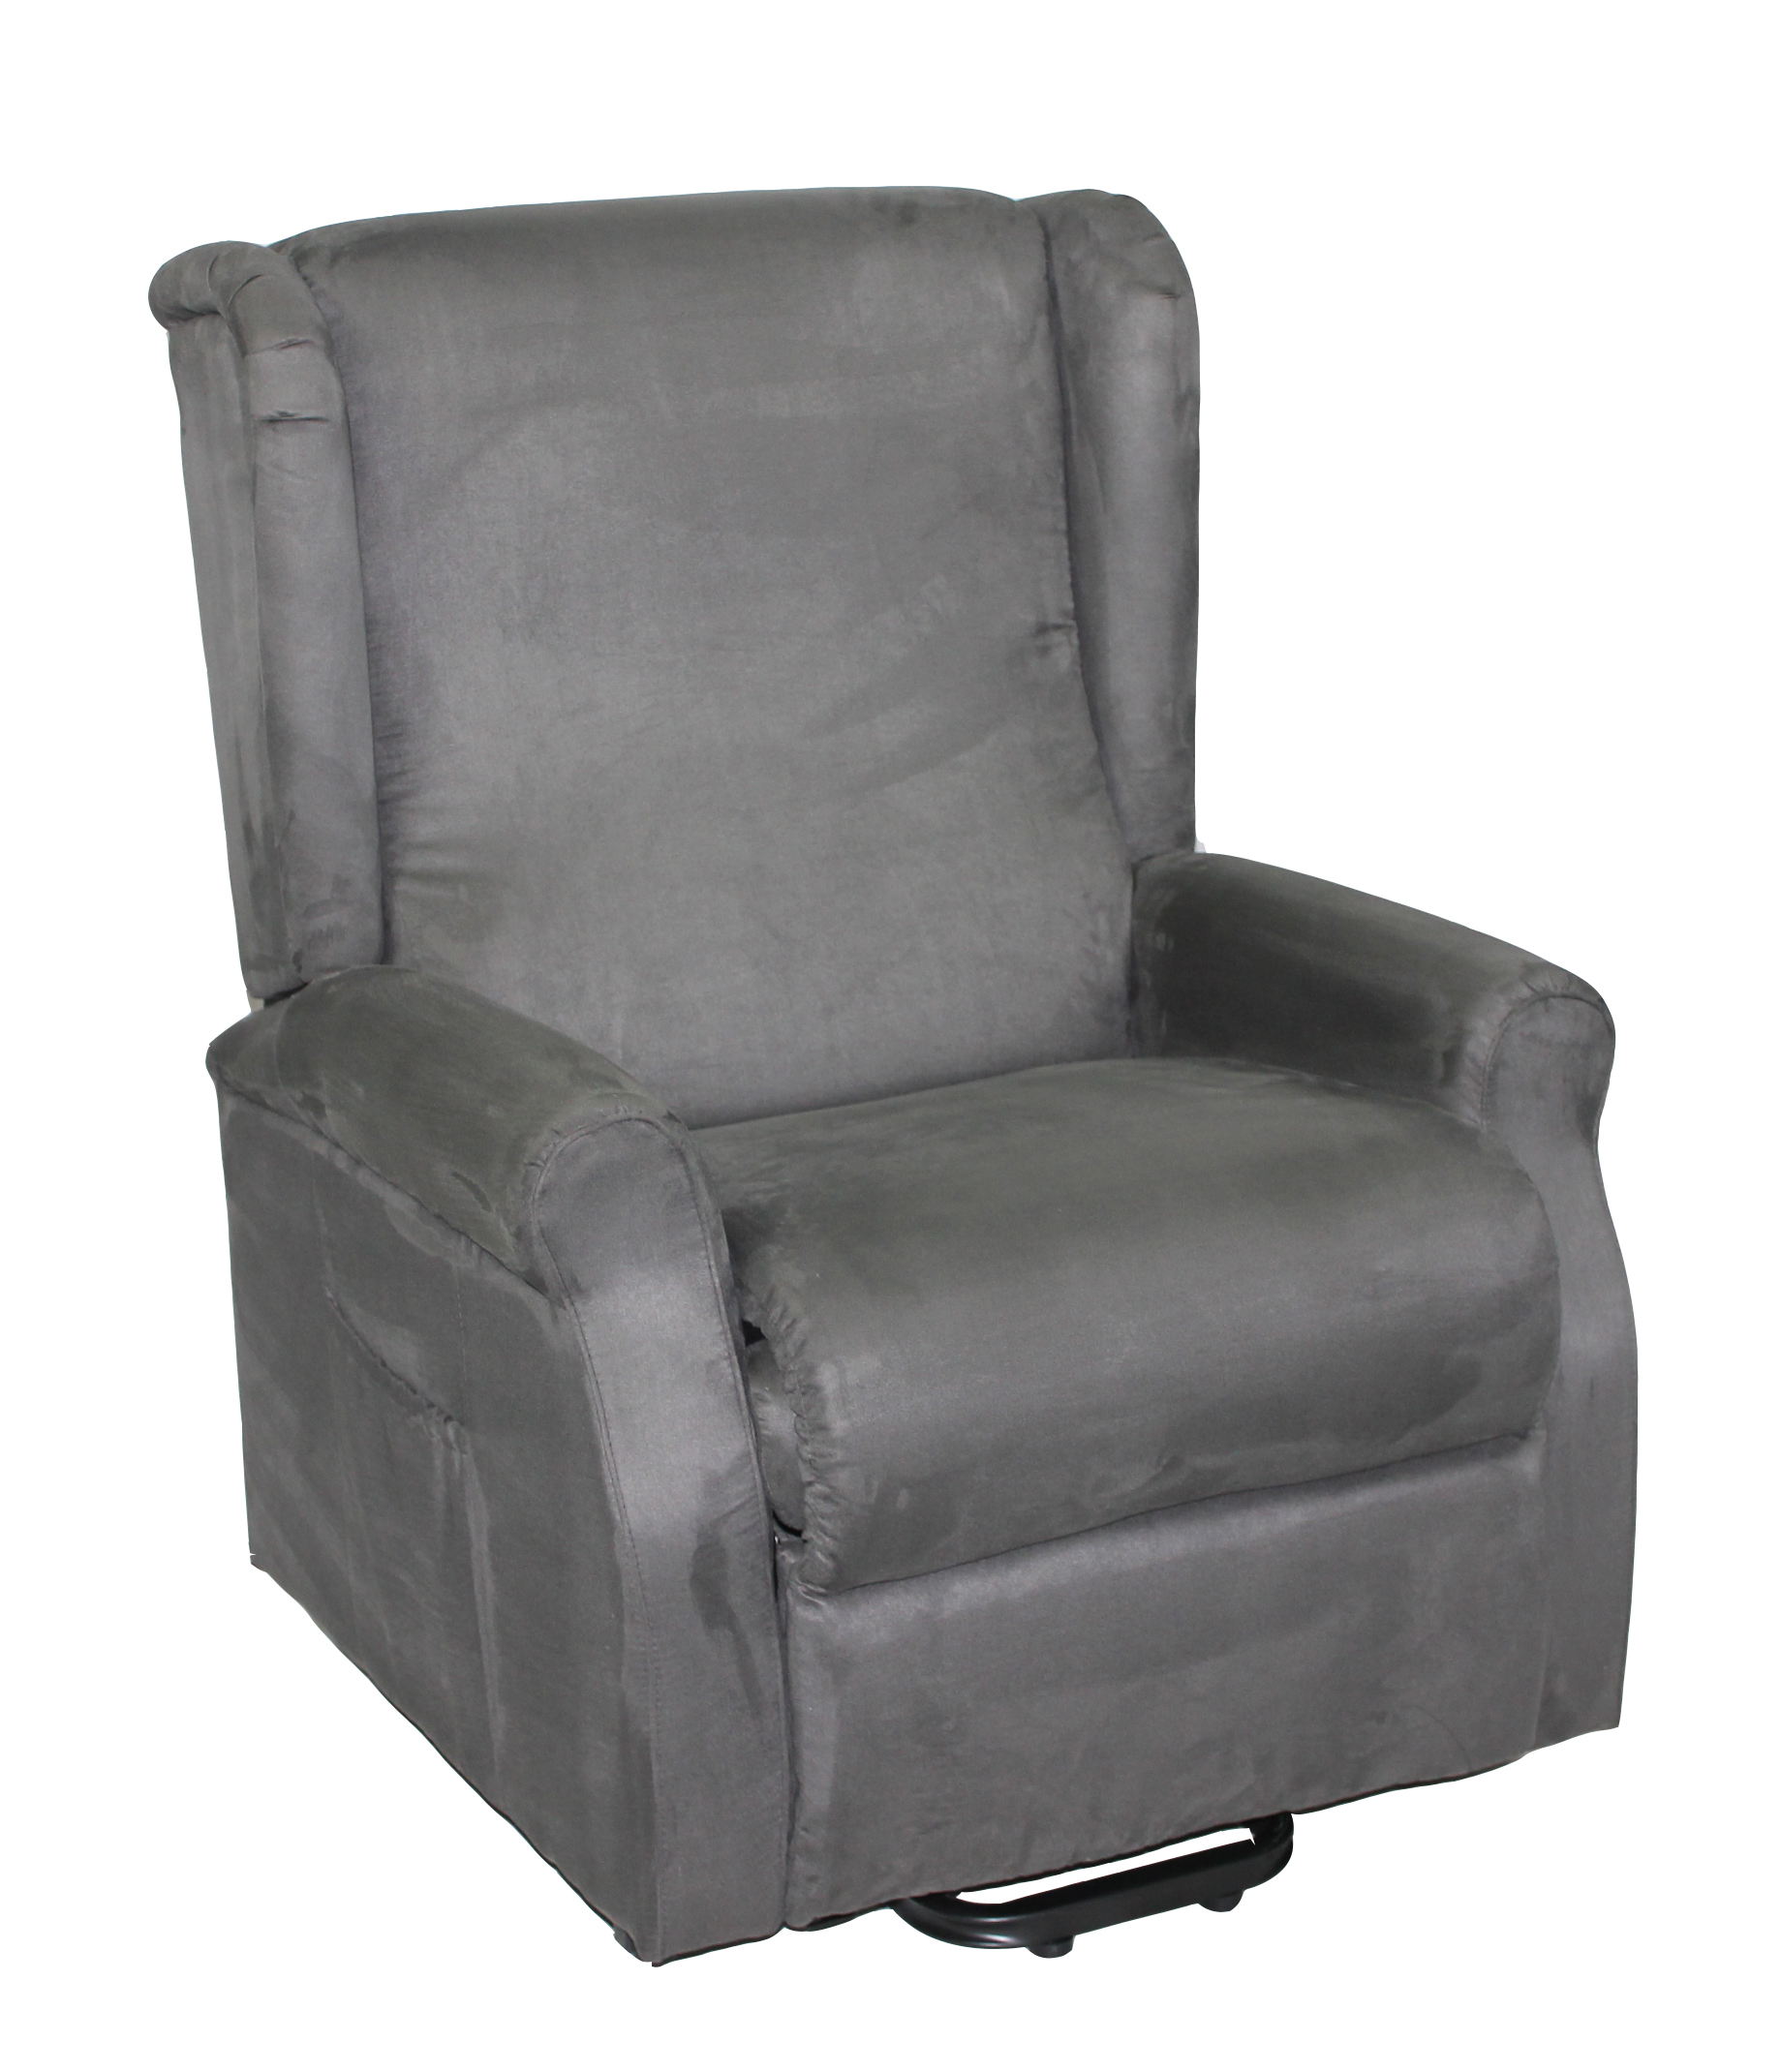 BME 003 factory wholesale Price Lift Chair with massage 